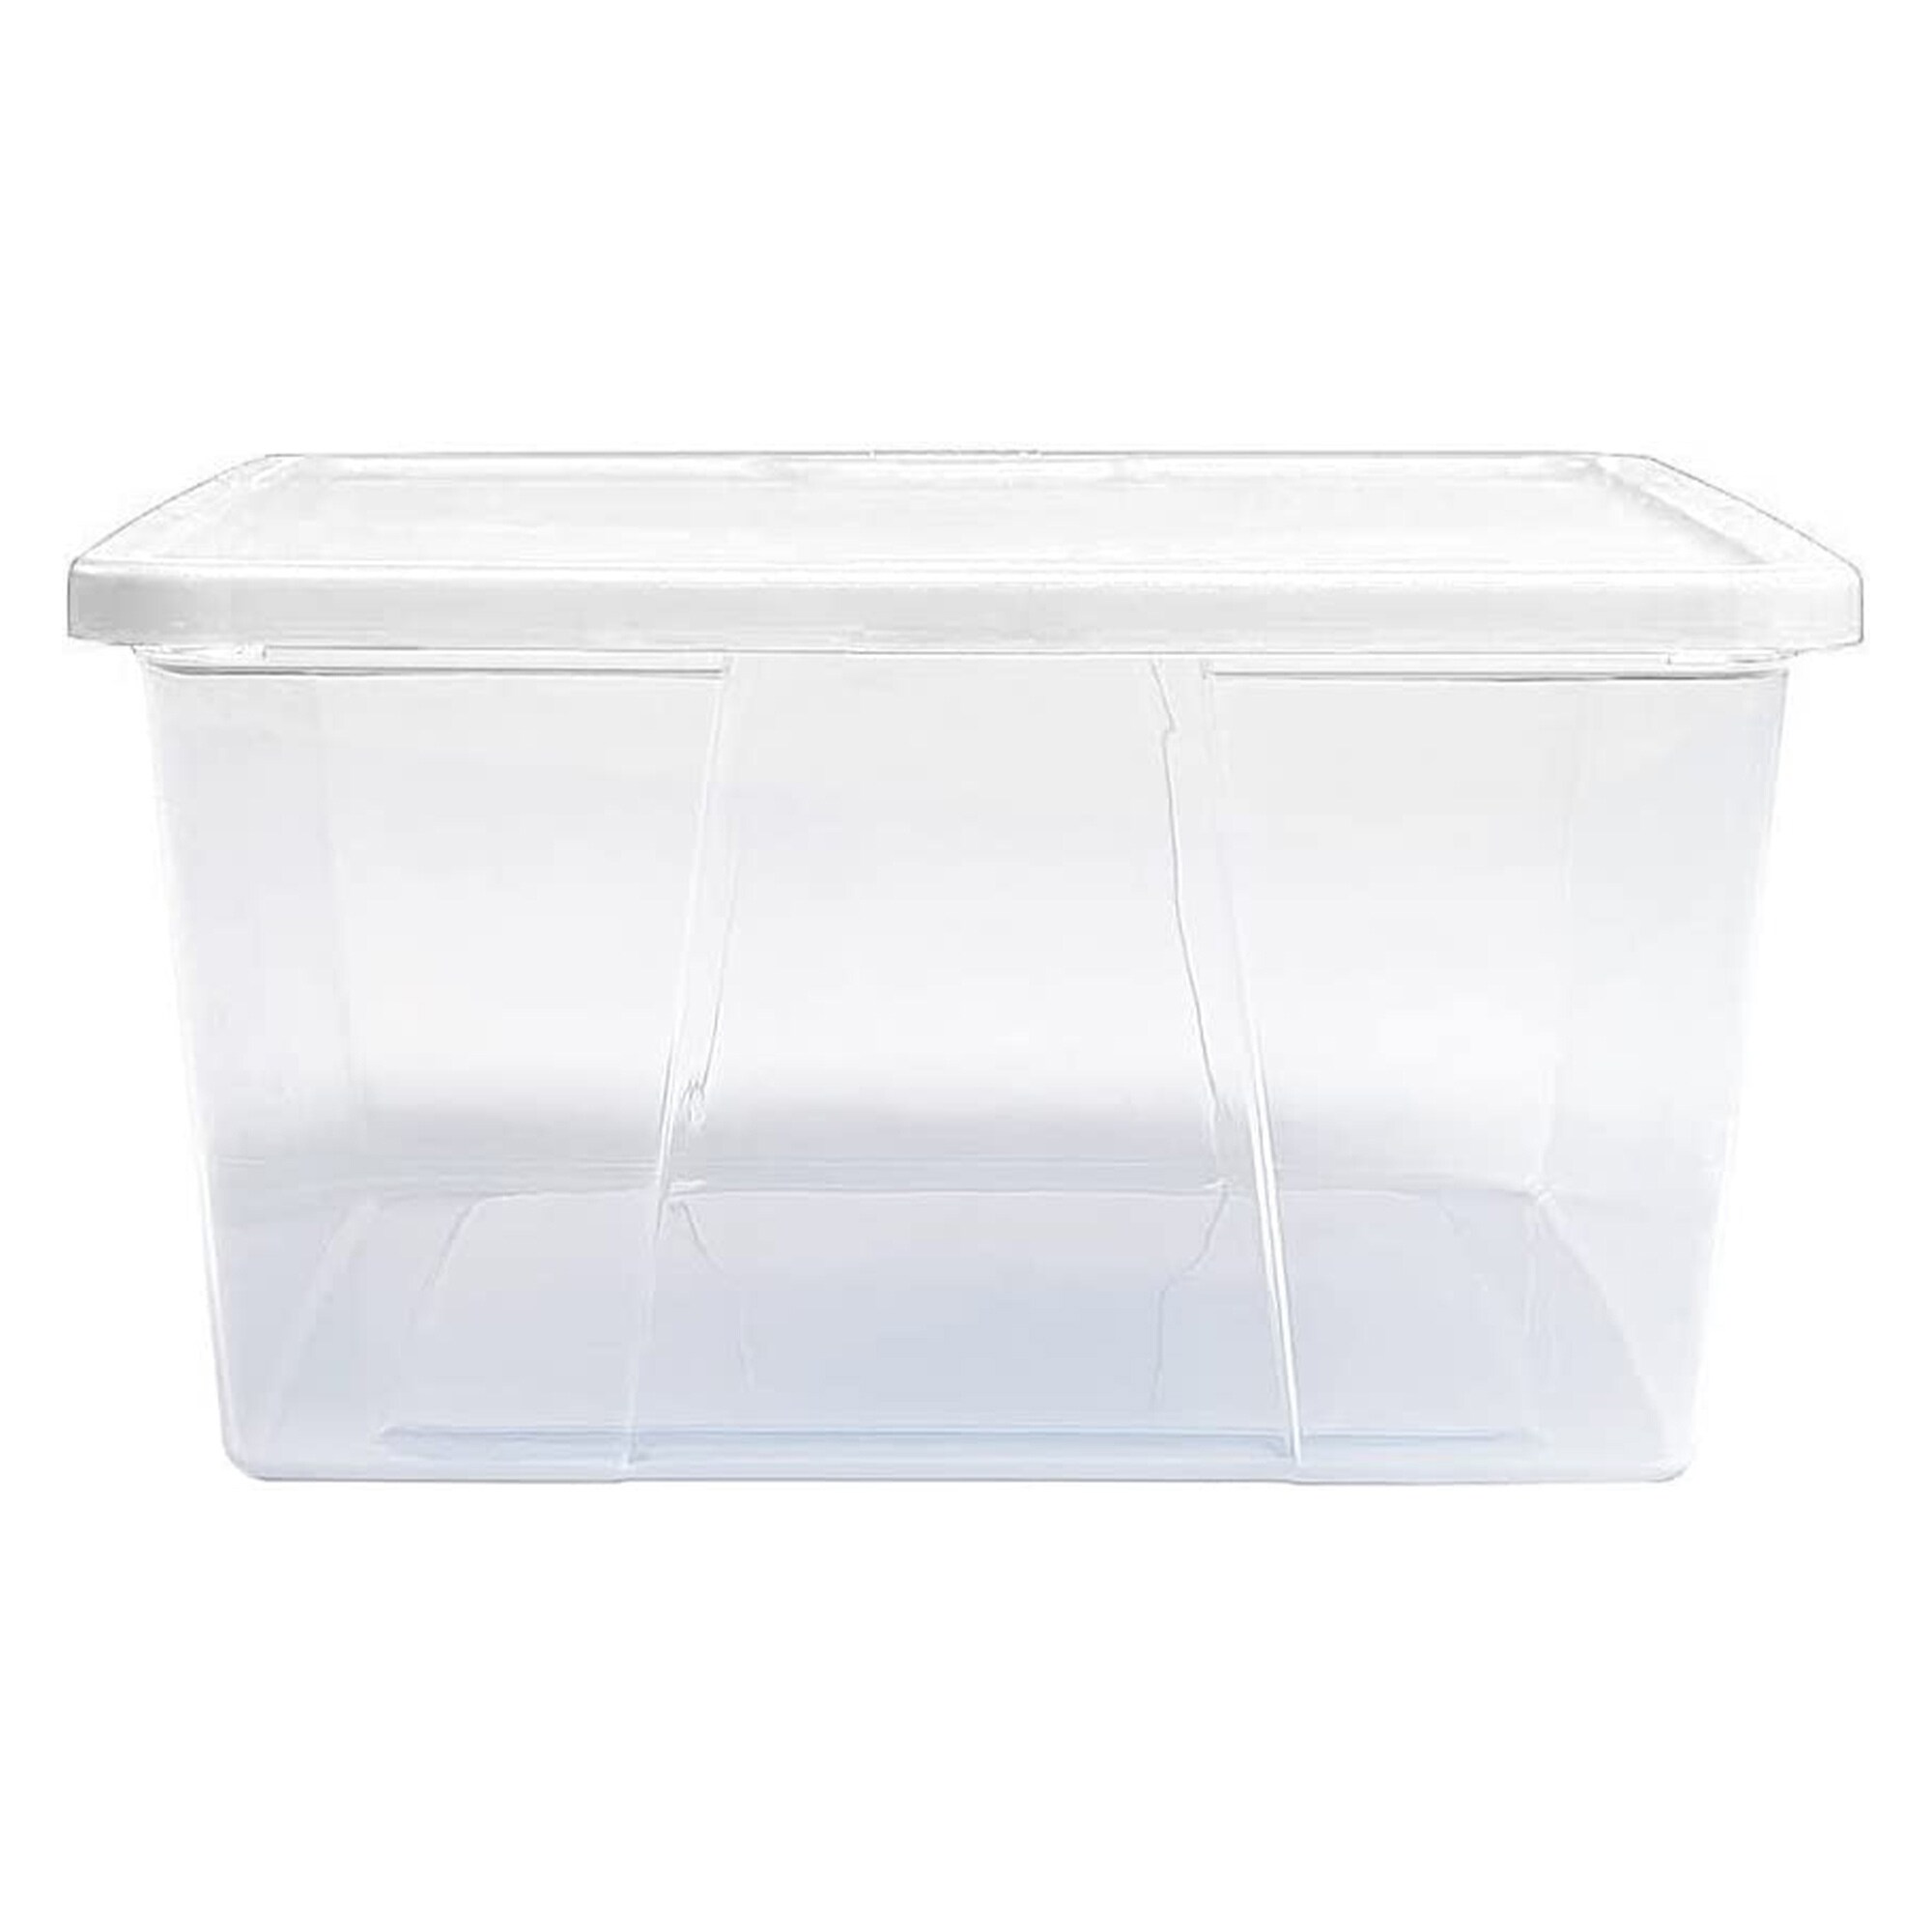 https://ak1.ostkcdn.com/images/products/is/images/direct/ed28c4f4f3cec2393dc80ac5add45a33b627744d/Homz-12-Qt-Snaplock-Clear-Plastic-Storage-Container-Bin-with-Secure-Lid-%288-Pack%29.jpg